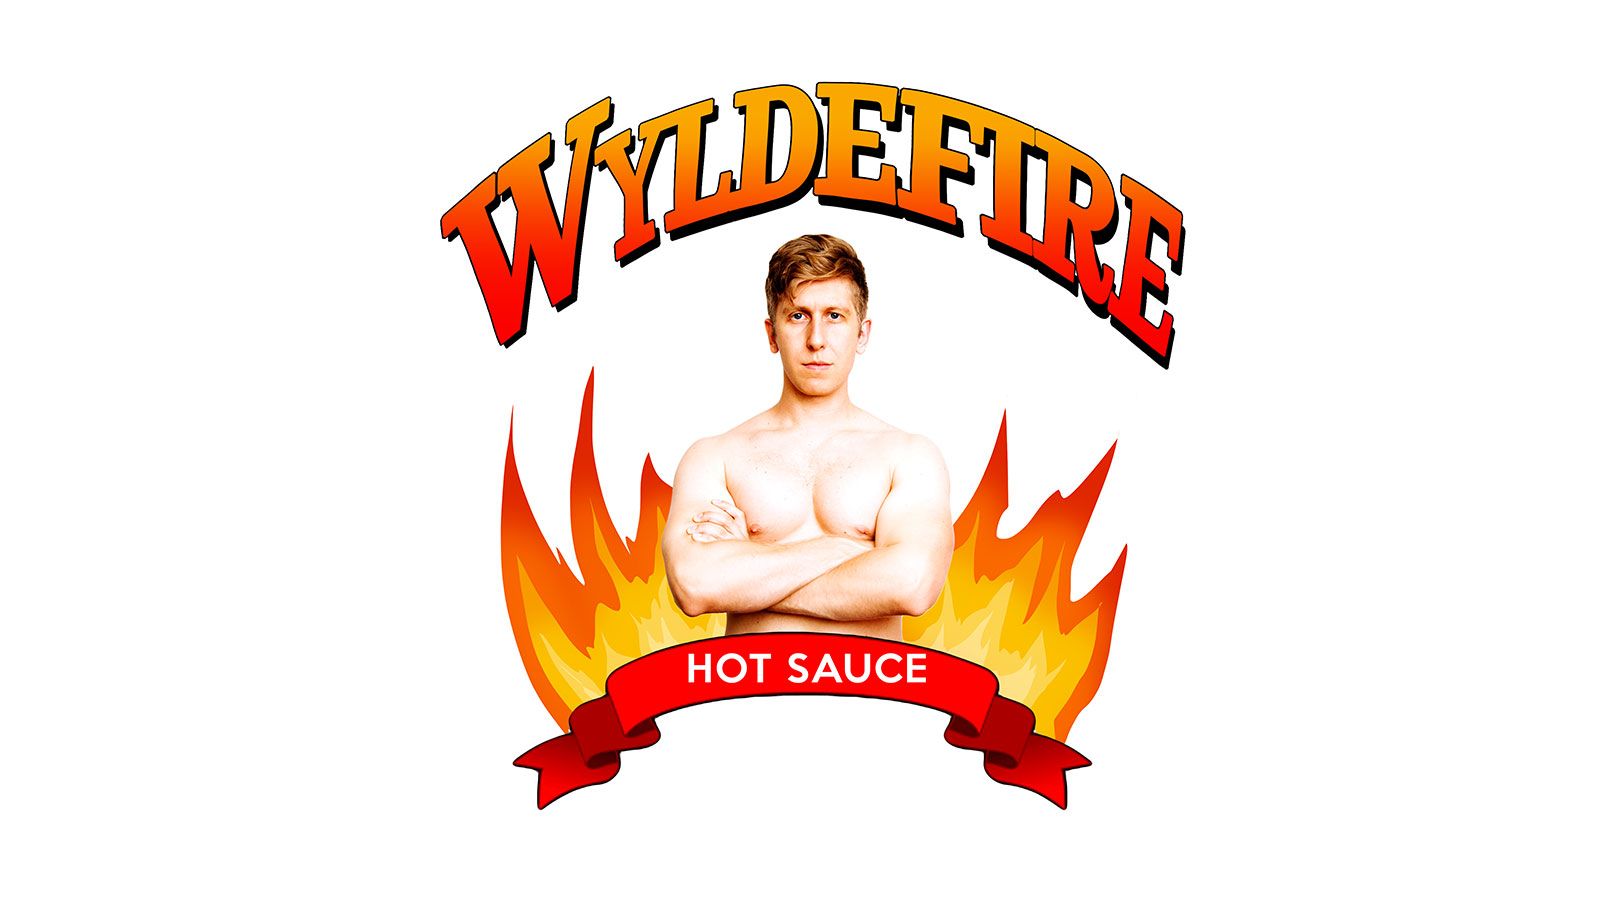 Porn Star-Turned-Chef Danny Wylde Releases New Hot Sauce for Valentine's Day 